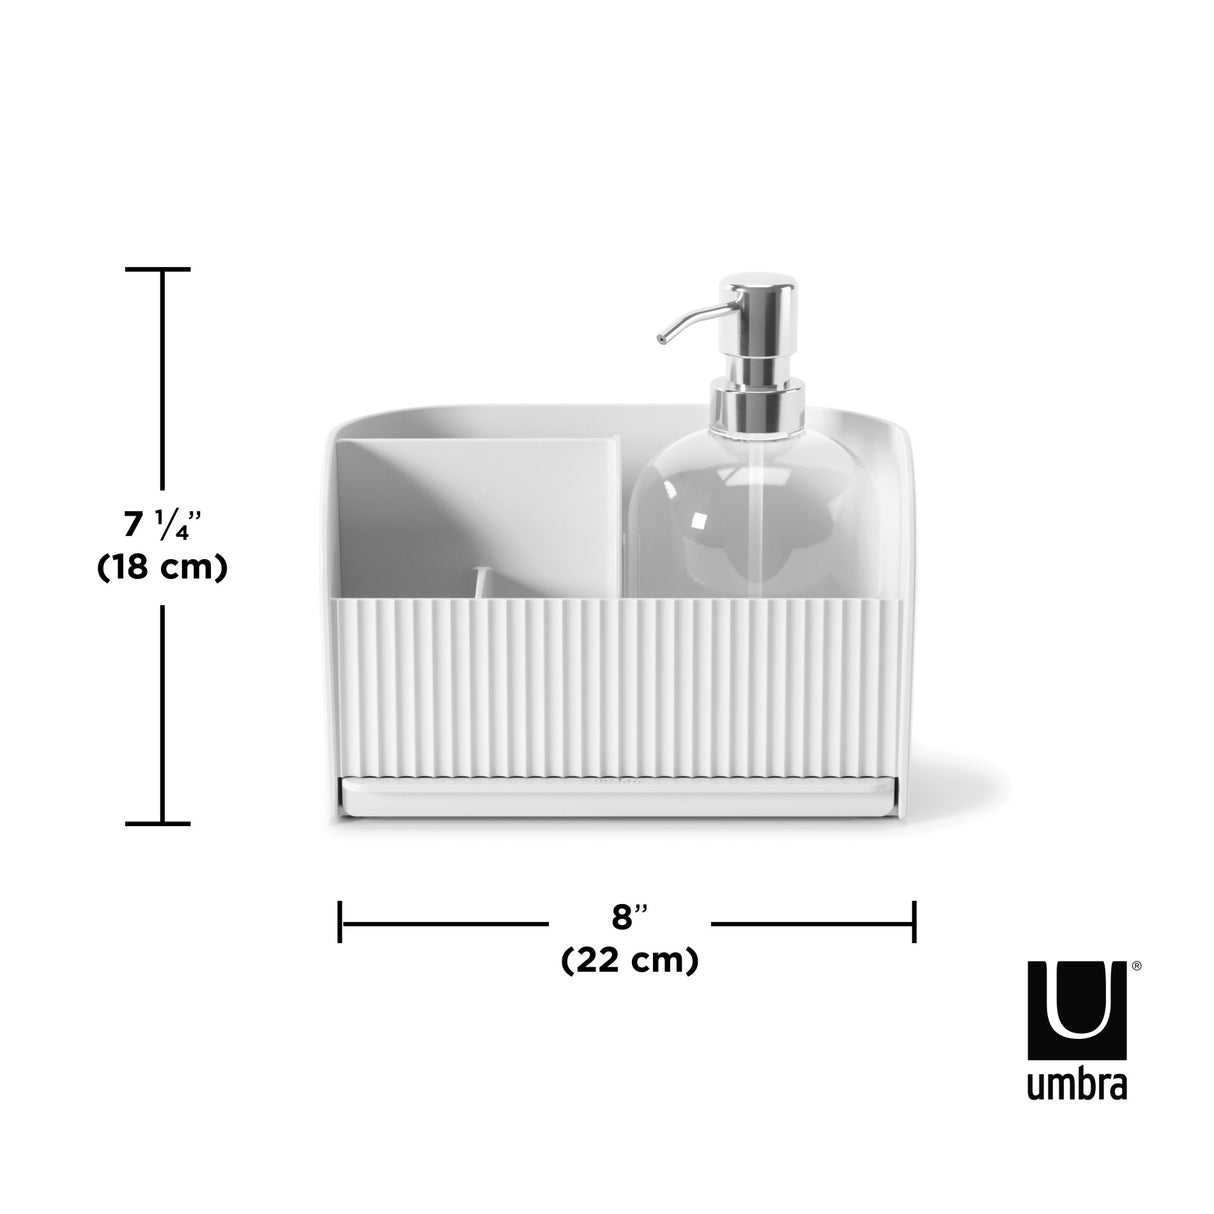 Sink Caddy | color: White